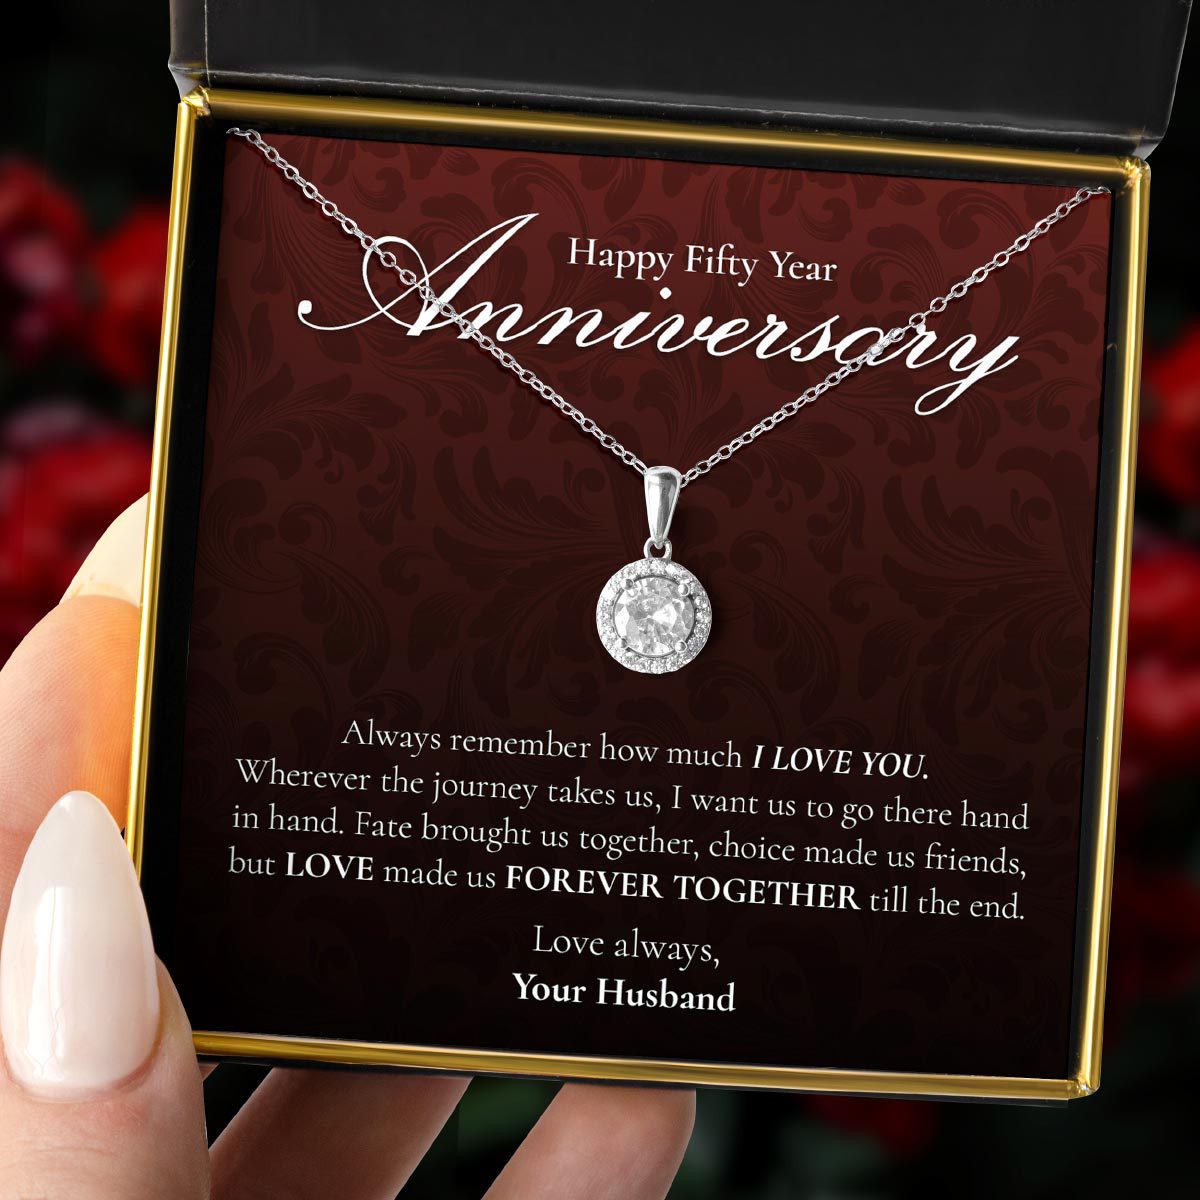 Happy Fifty Year Anniversary - Classique Sterling Silver Halo Pendant Necklace Gift Set